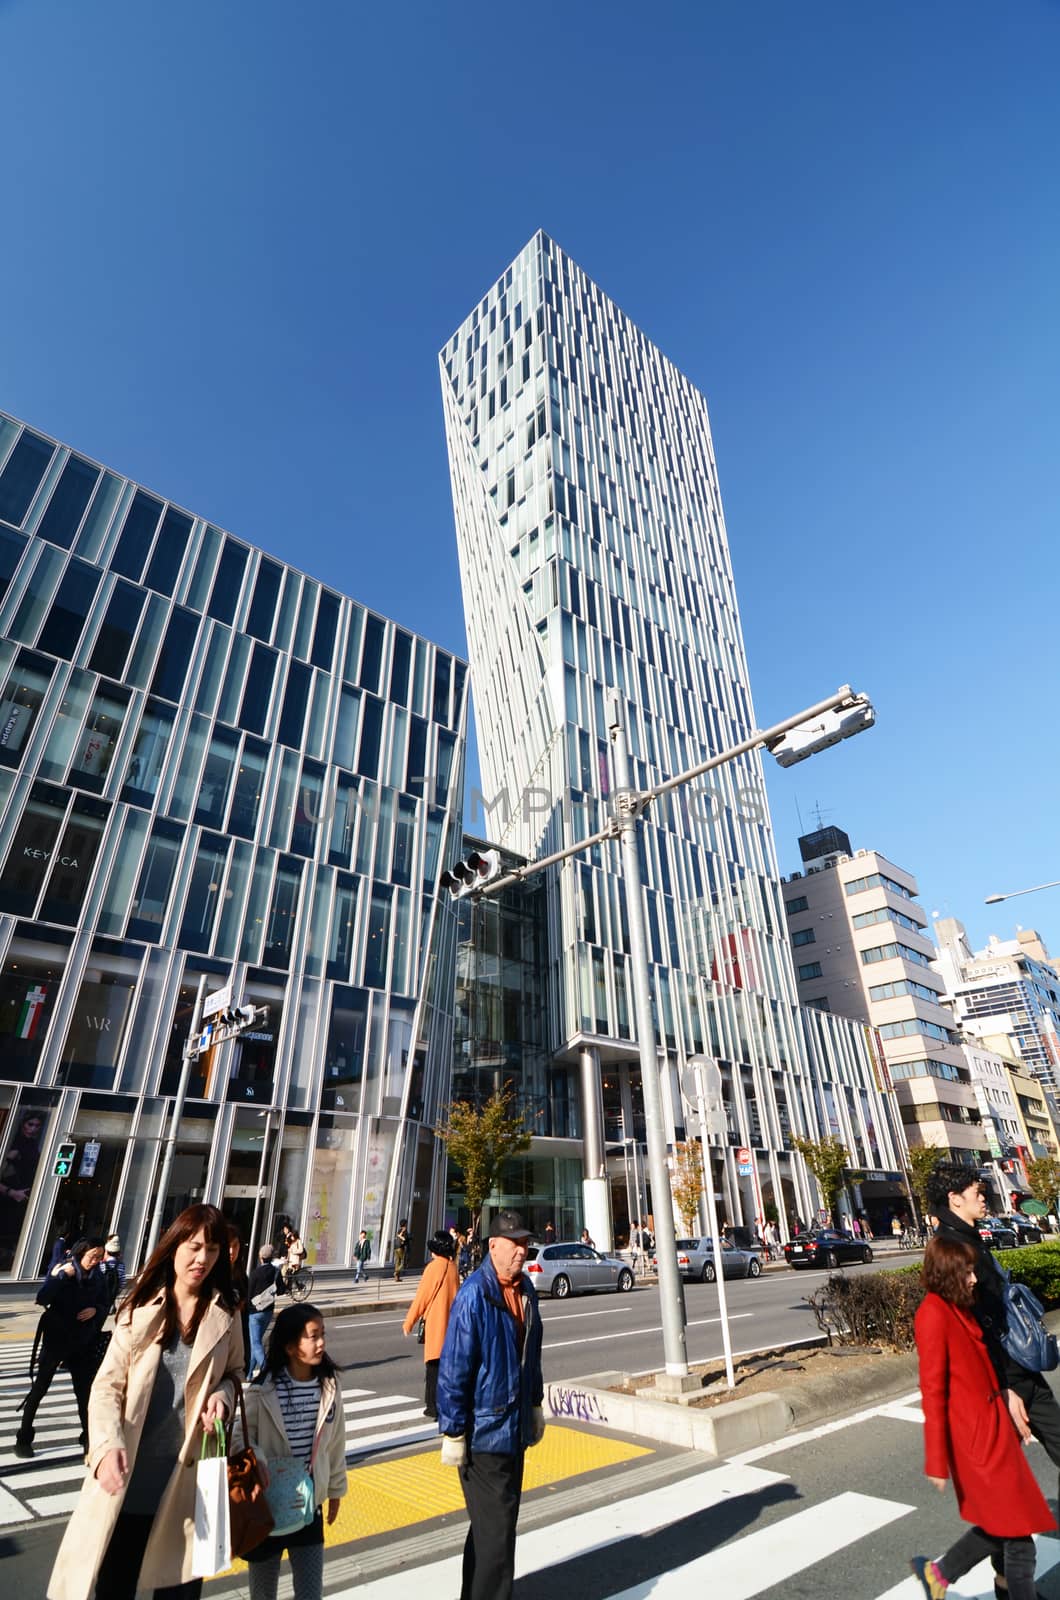 Tokyo, Japan - November 24, 2013: People walk by Futuristic Architecture on Omotesando Street on November 24. 2013, Omotesando street sometimes referred to as Tokyo's Champs-Elysees. Here you can find famous brand name shops, cafes and restaurants for a more adult clientele.